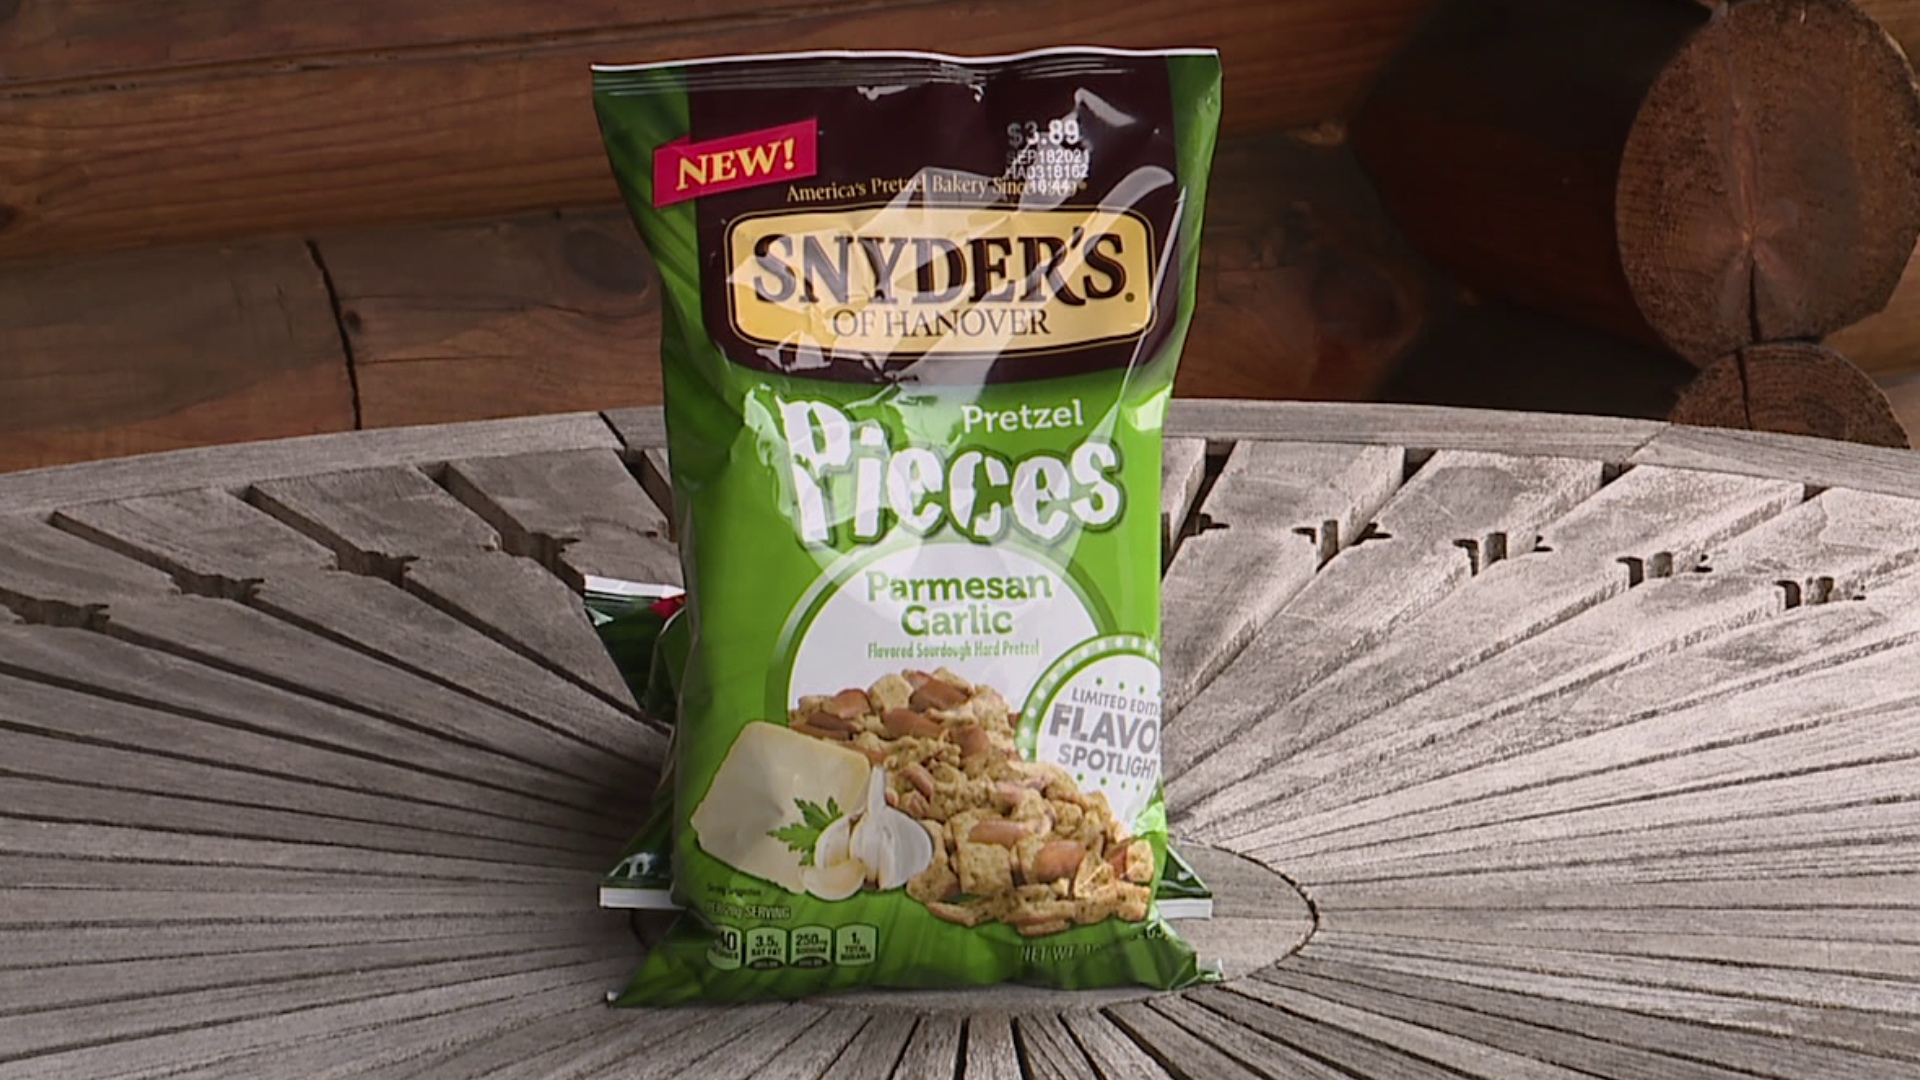 Snyder's now has a savory flavor just for garlic lovers.